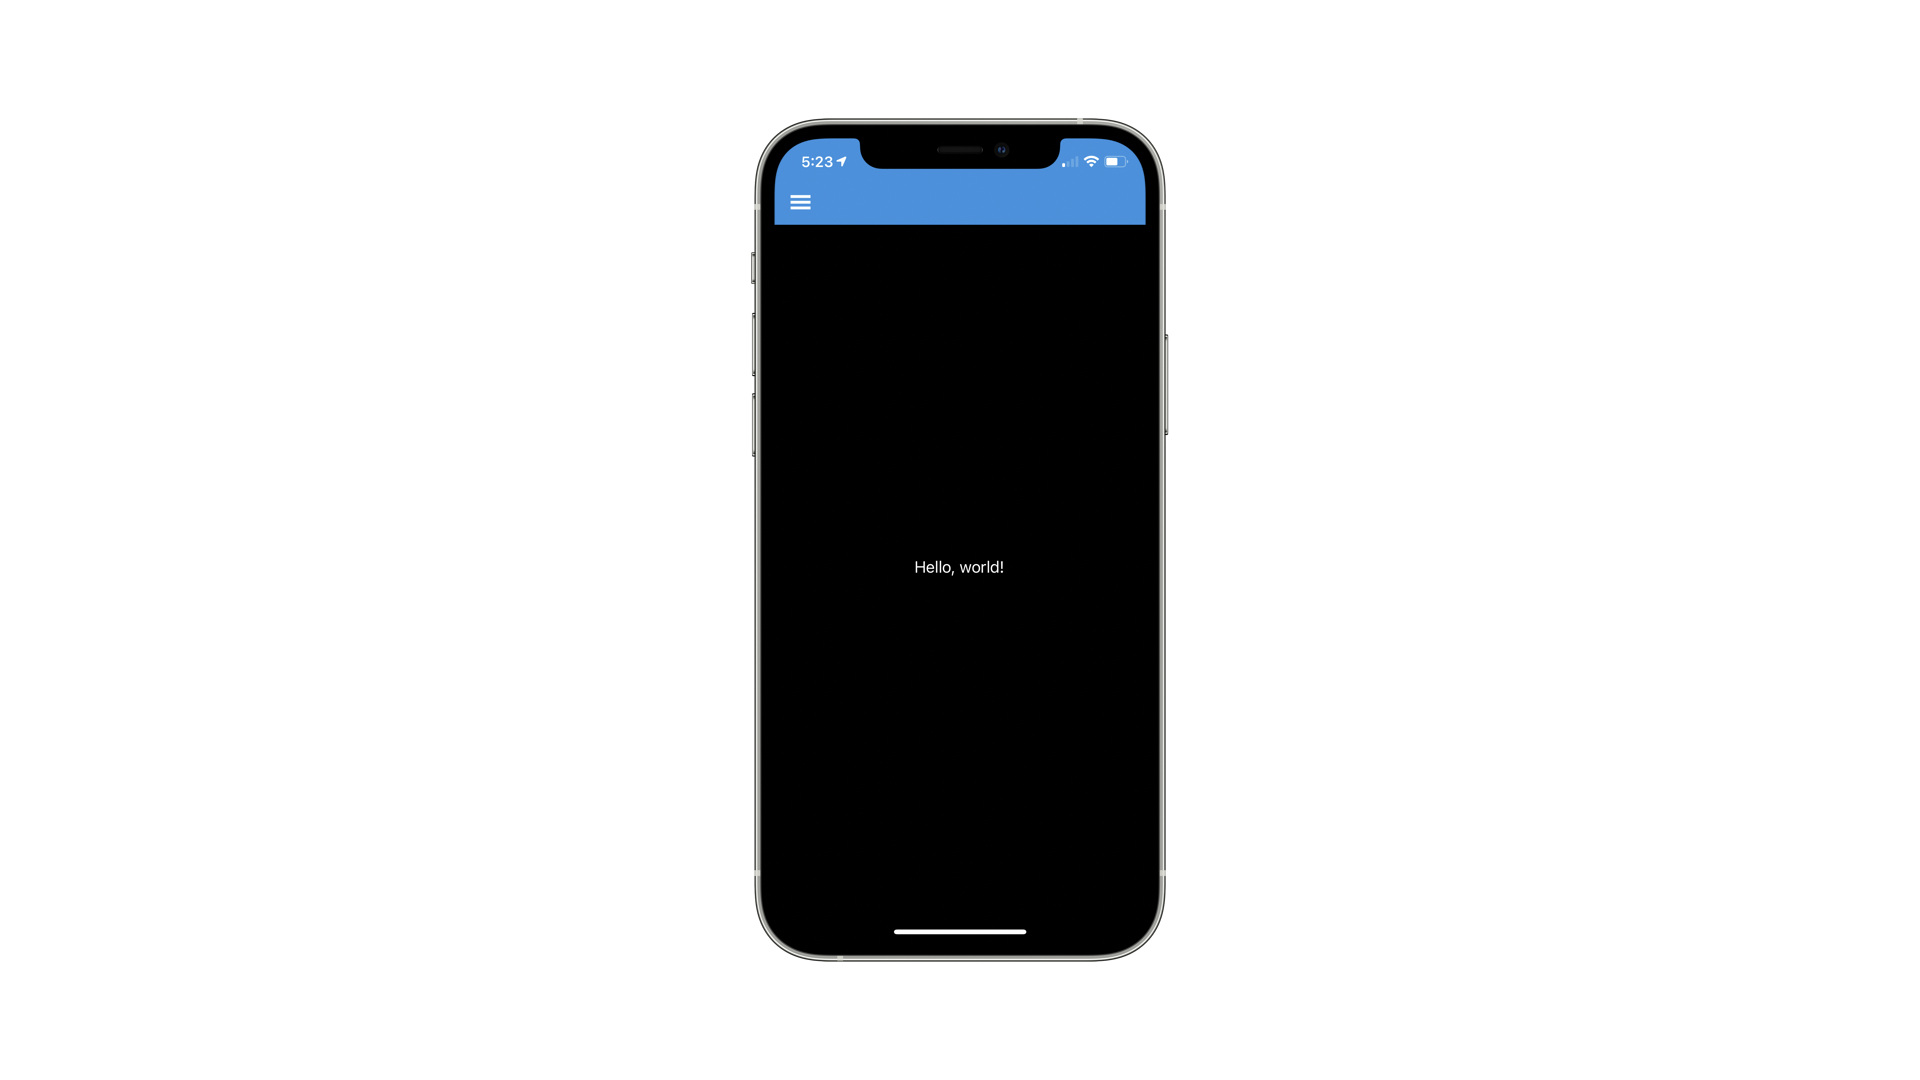 Mobile application with black background with white text that says hello world!